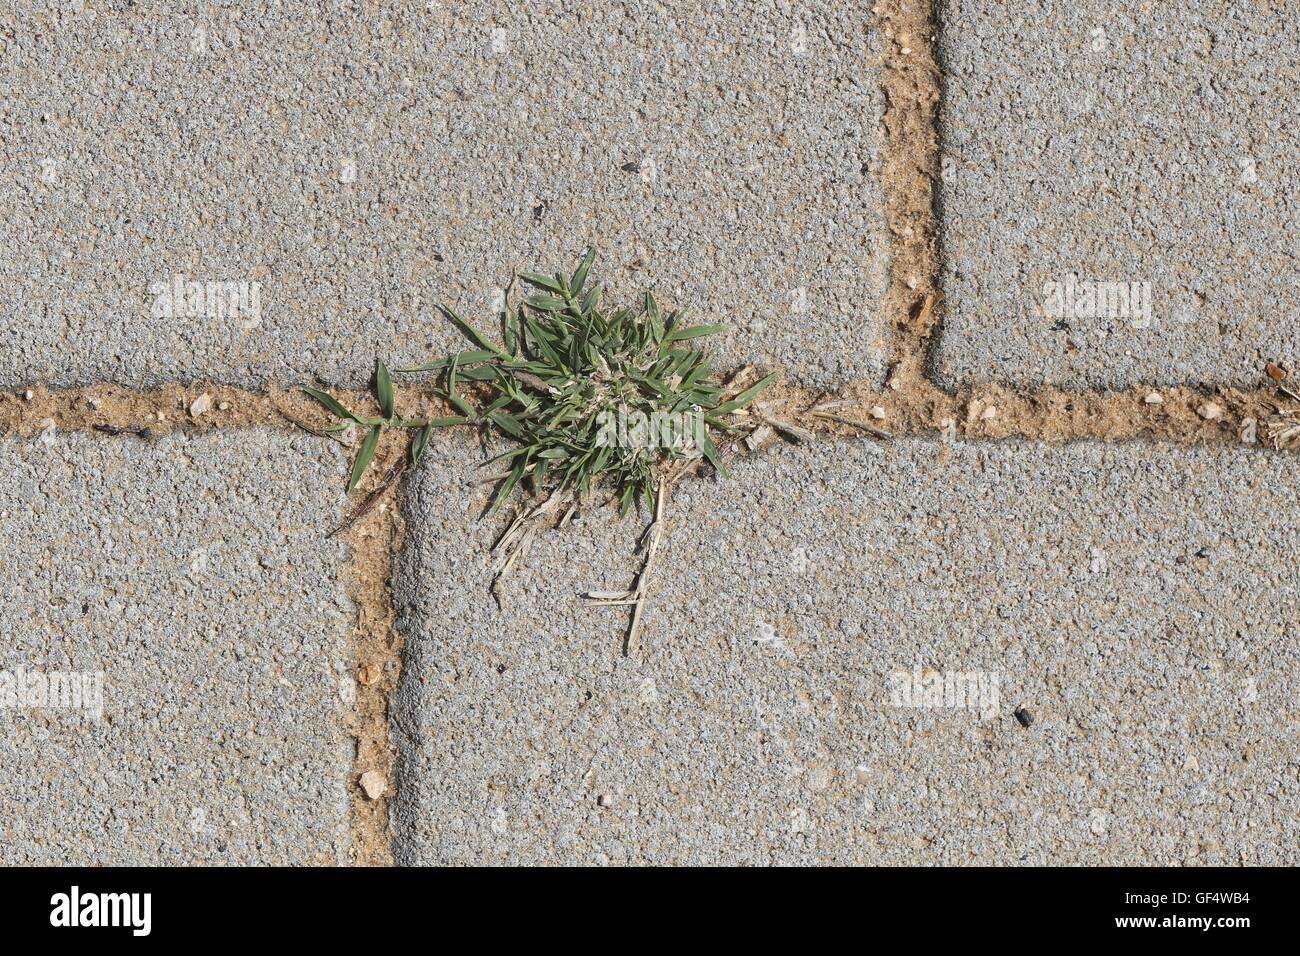 Grass Growing Between Paving Stones. Grass peeking through the paving stones Spaces. Symbol of nature in urban environment. Stock Photo